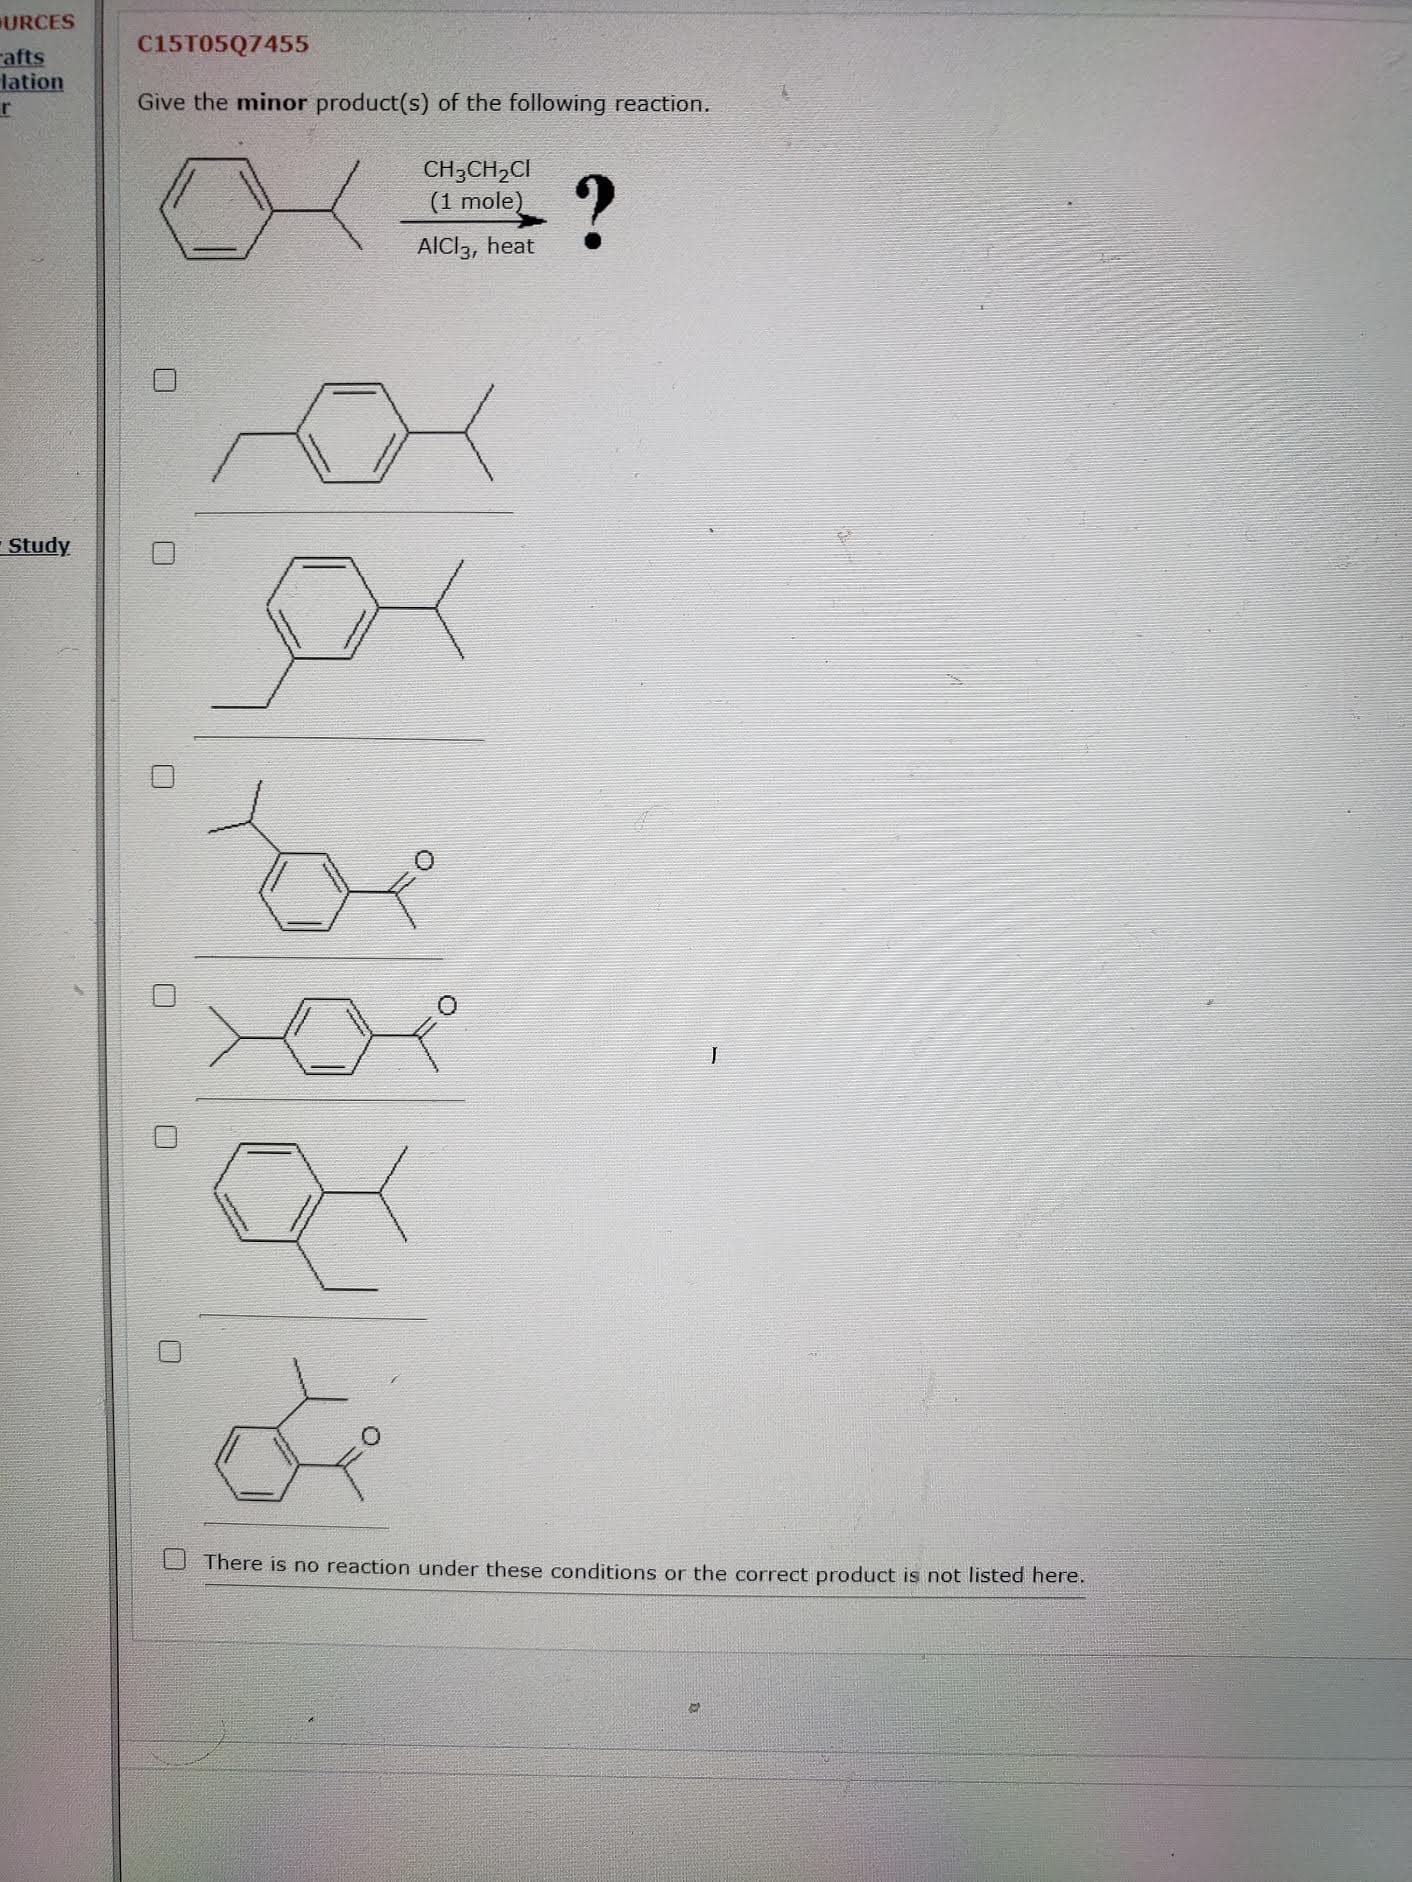 Give the minor product(s) of the following reaction.
CH3CH2CI
(1 mole)
AICI3, heat
U There is no reaction under these conditions or the correct product is not listed here.
